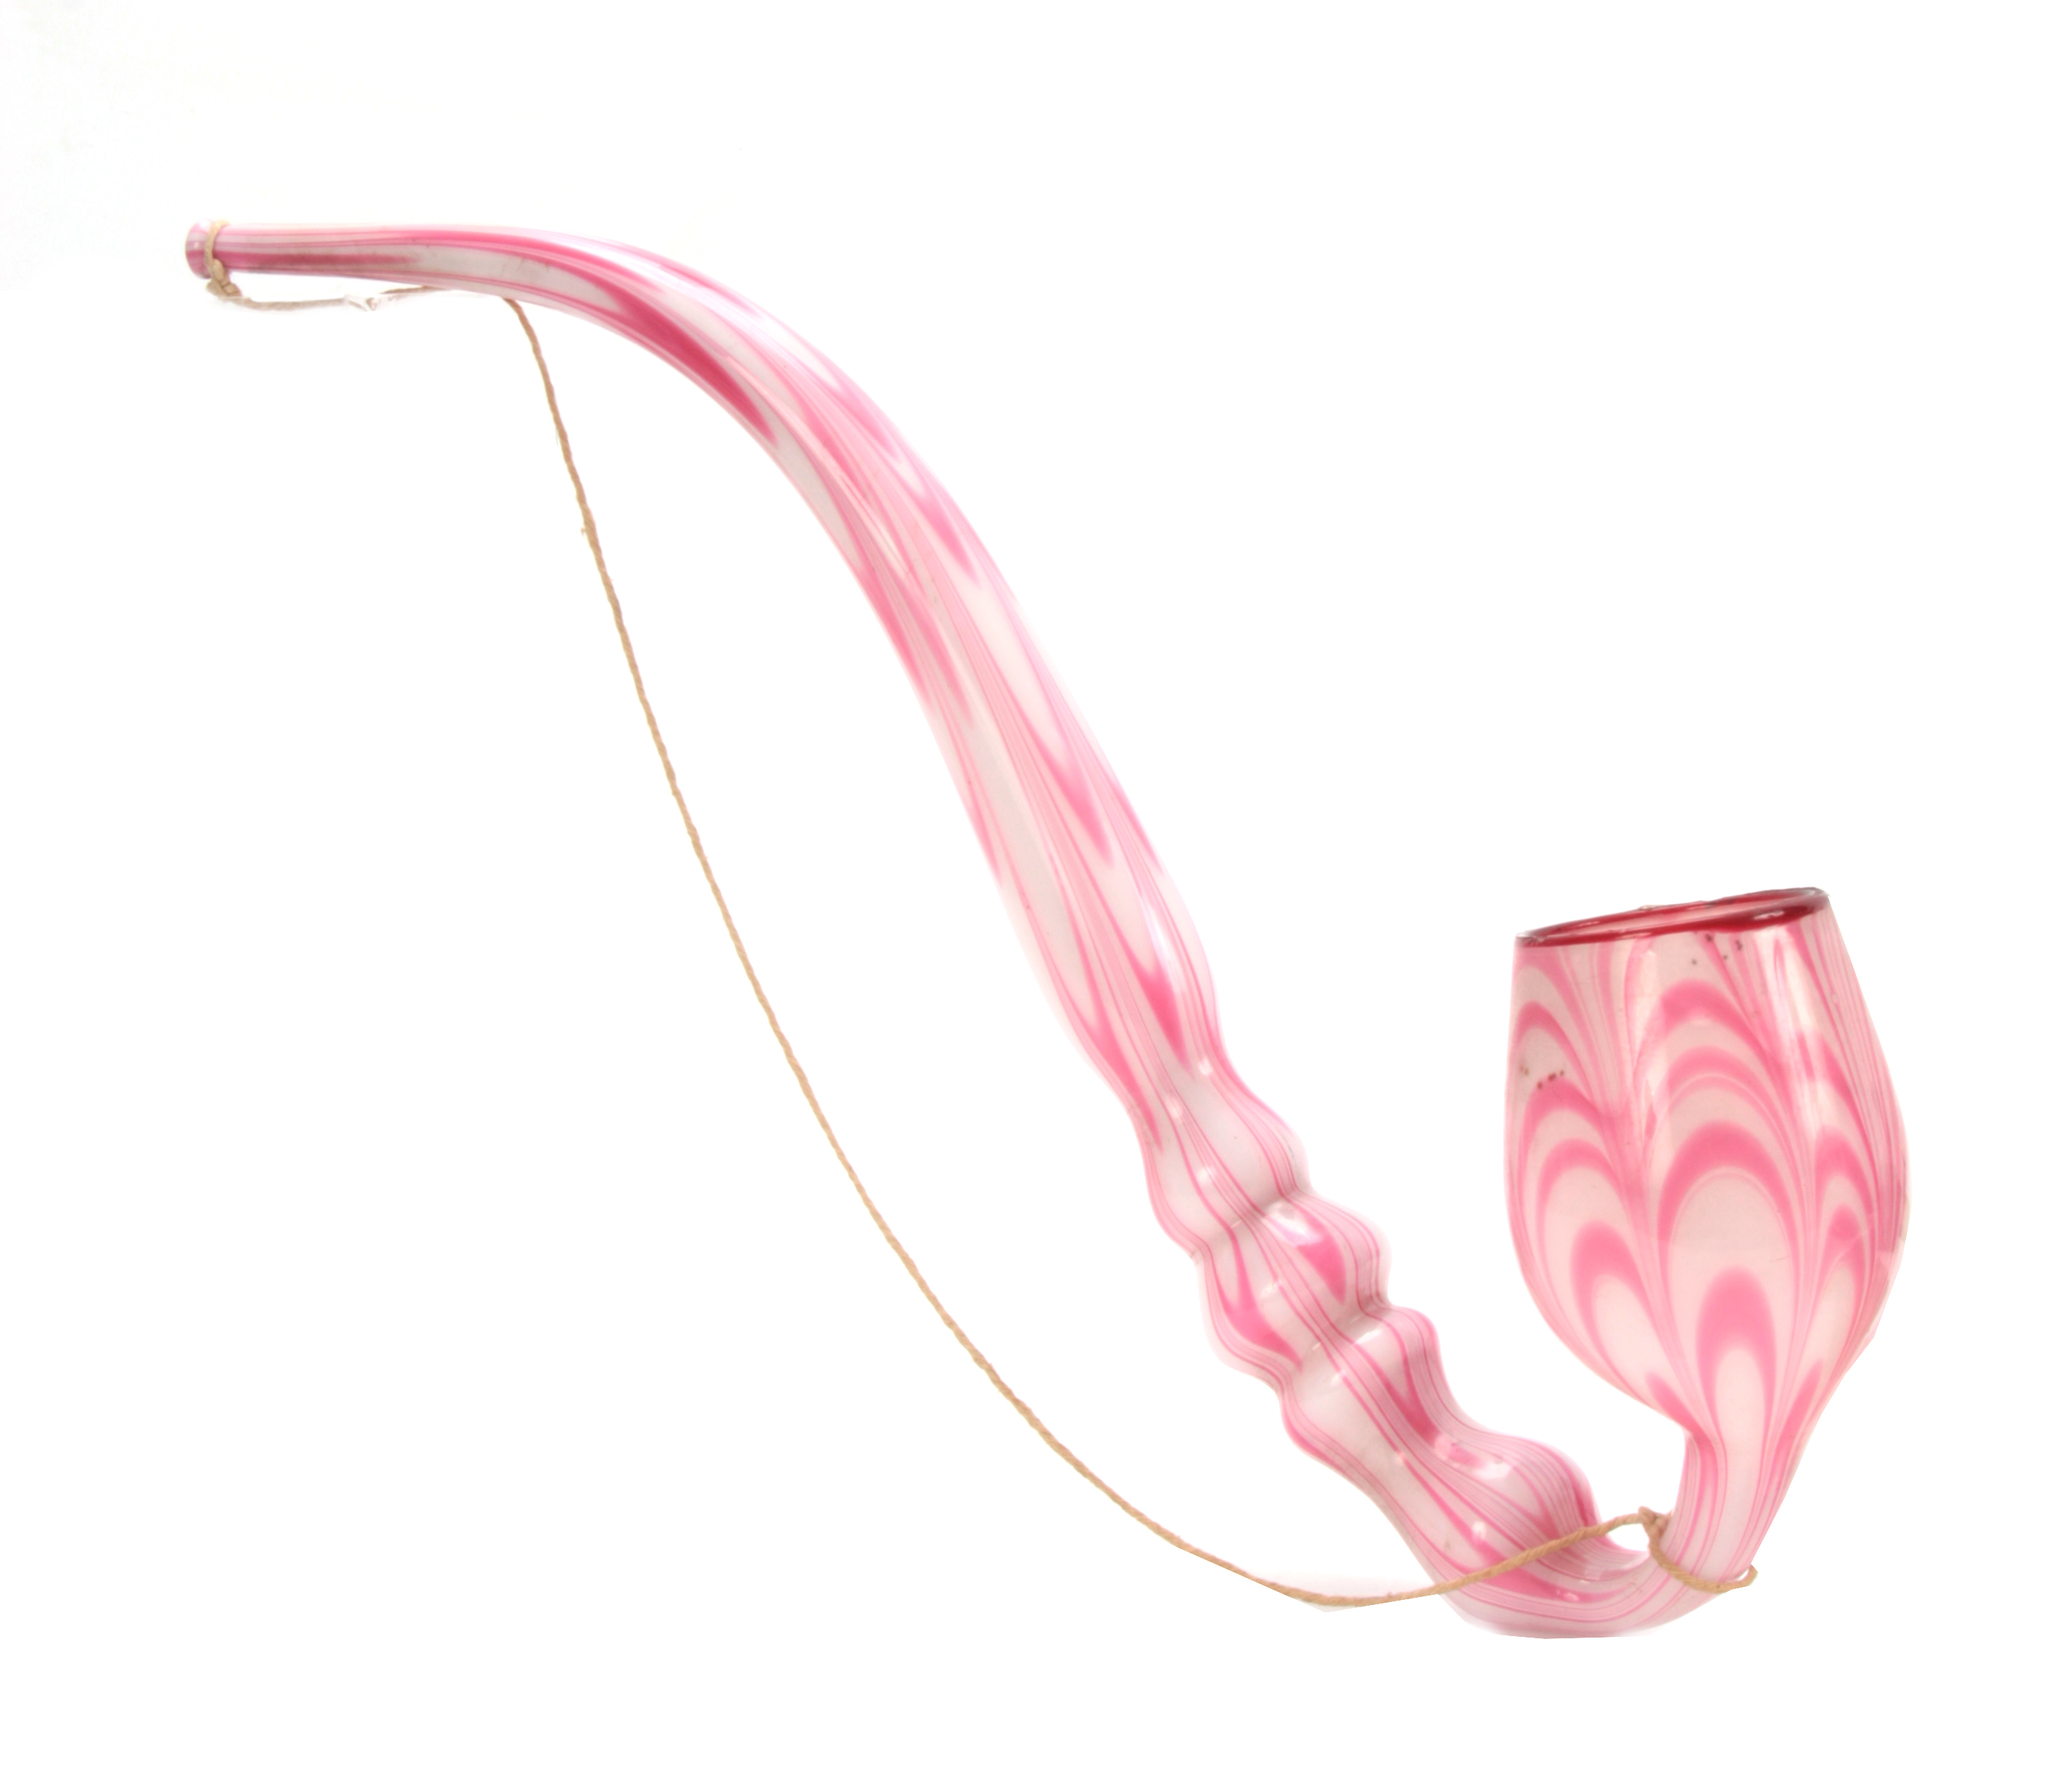 A LARGE 19TH CENTURY STOURBRIDGE GLASS PIPE of twisted pink and opaque design 50cm overall.